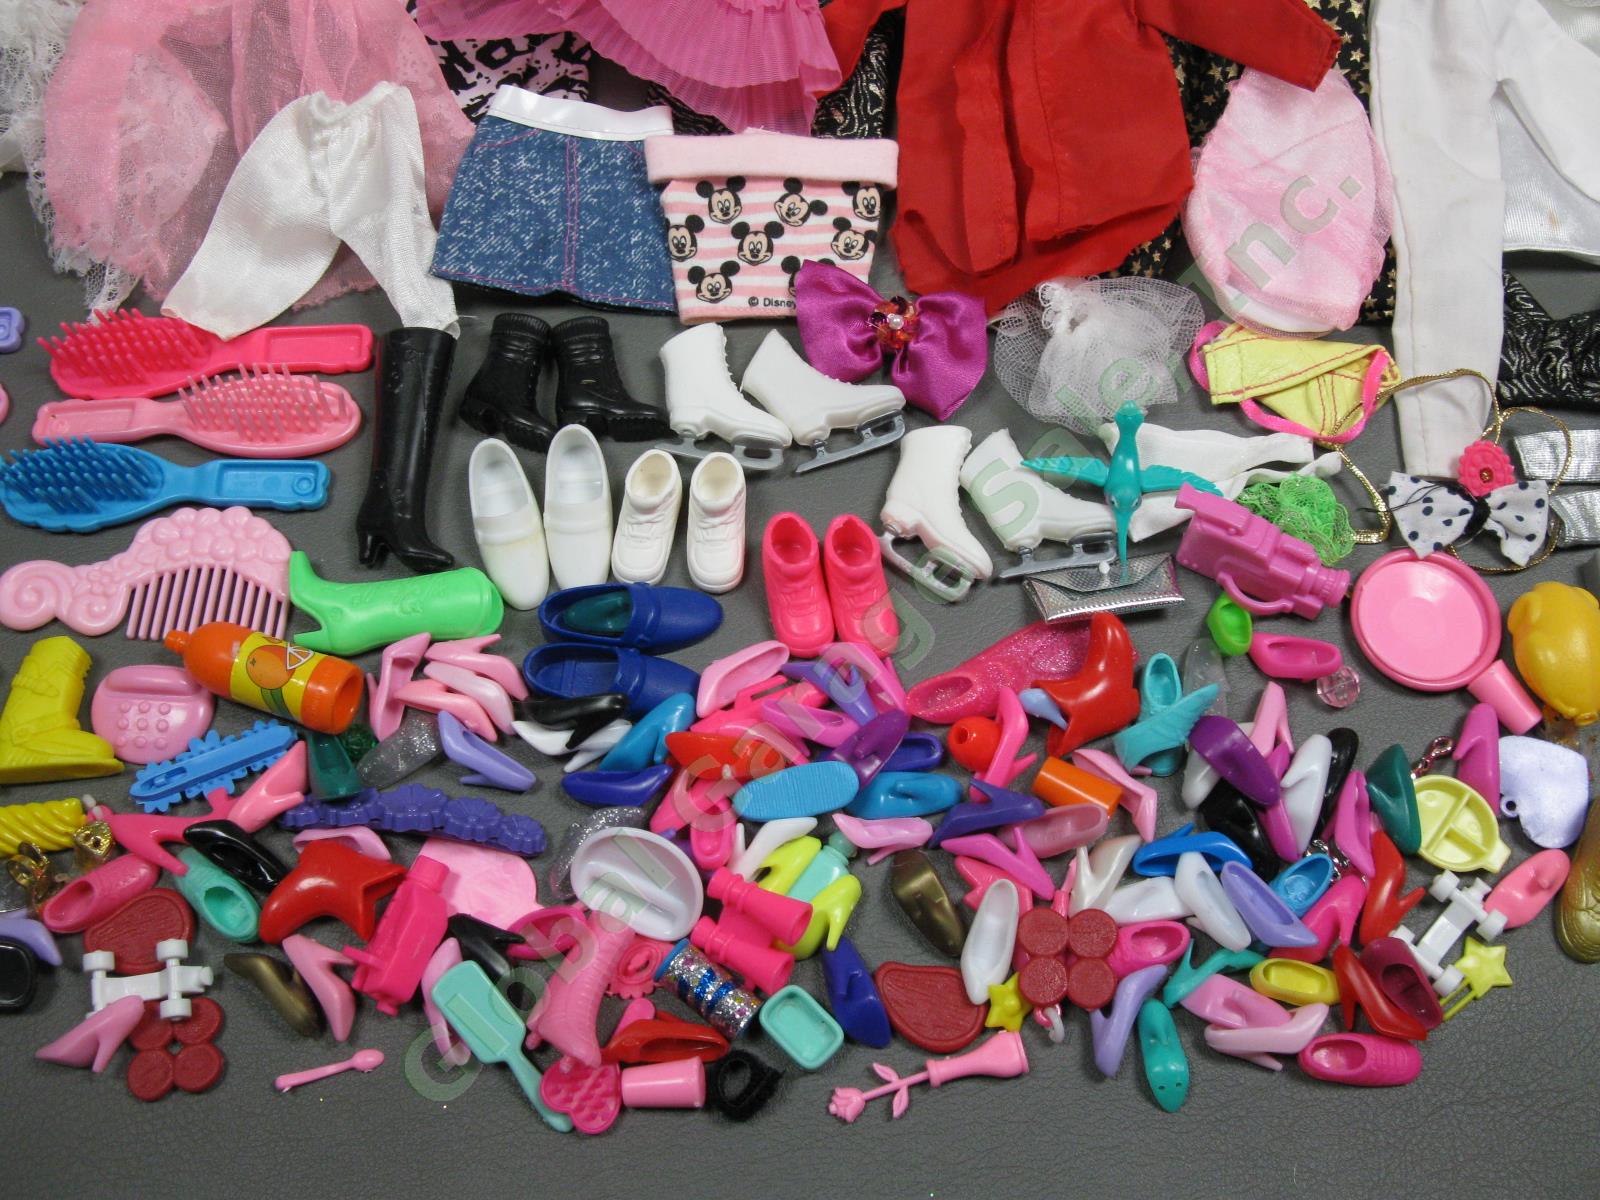 HUGE 29 1970s-1990s Barbie Doll Lot Horse Clothes Accessories Disney Collection 45